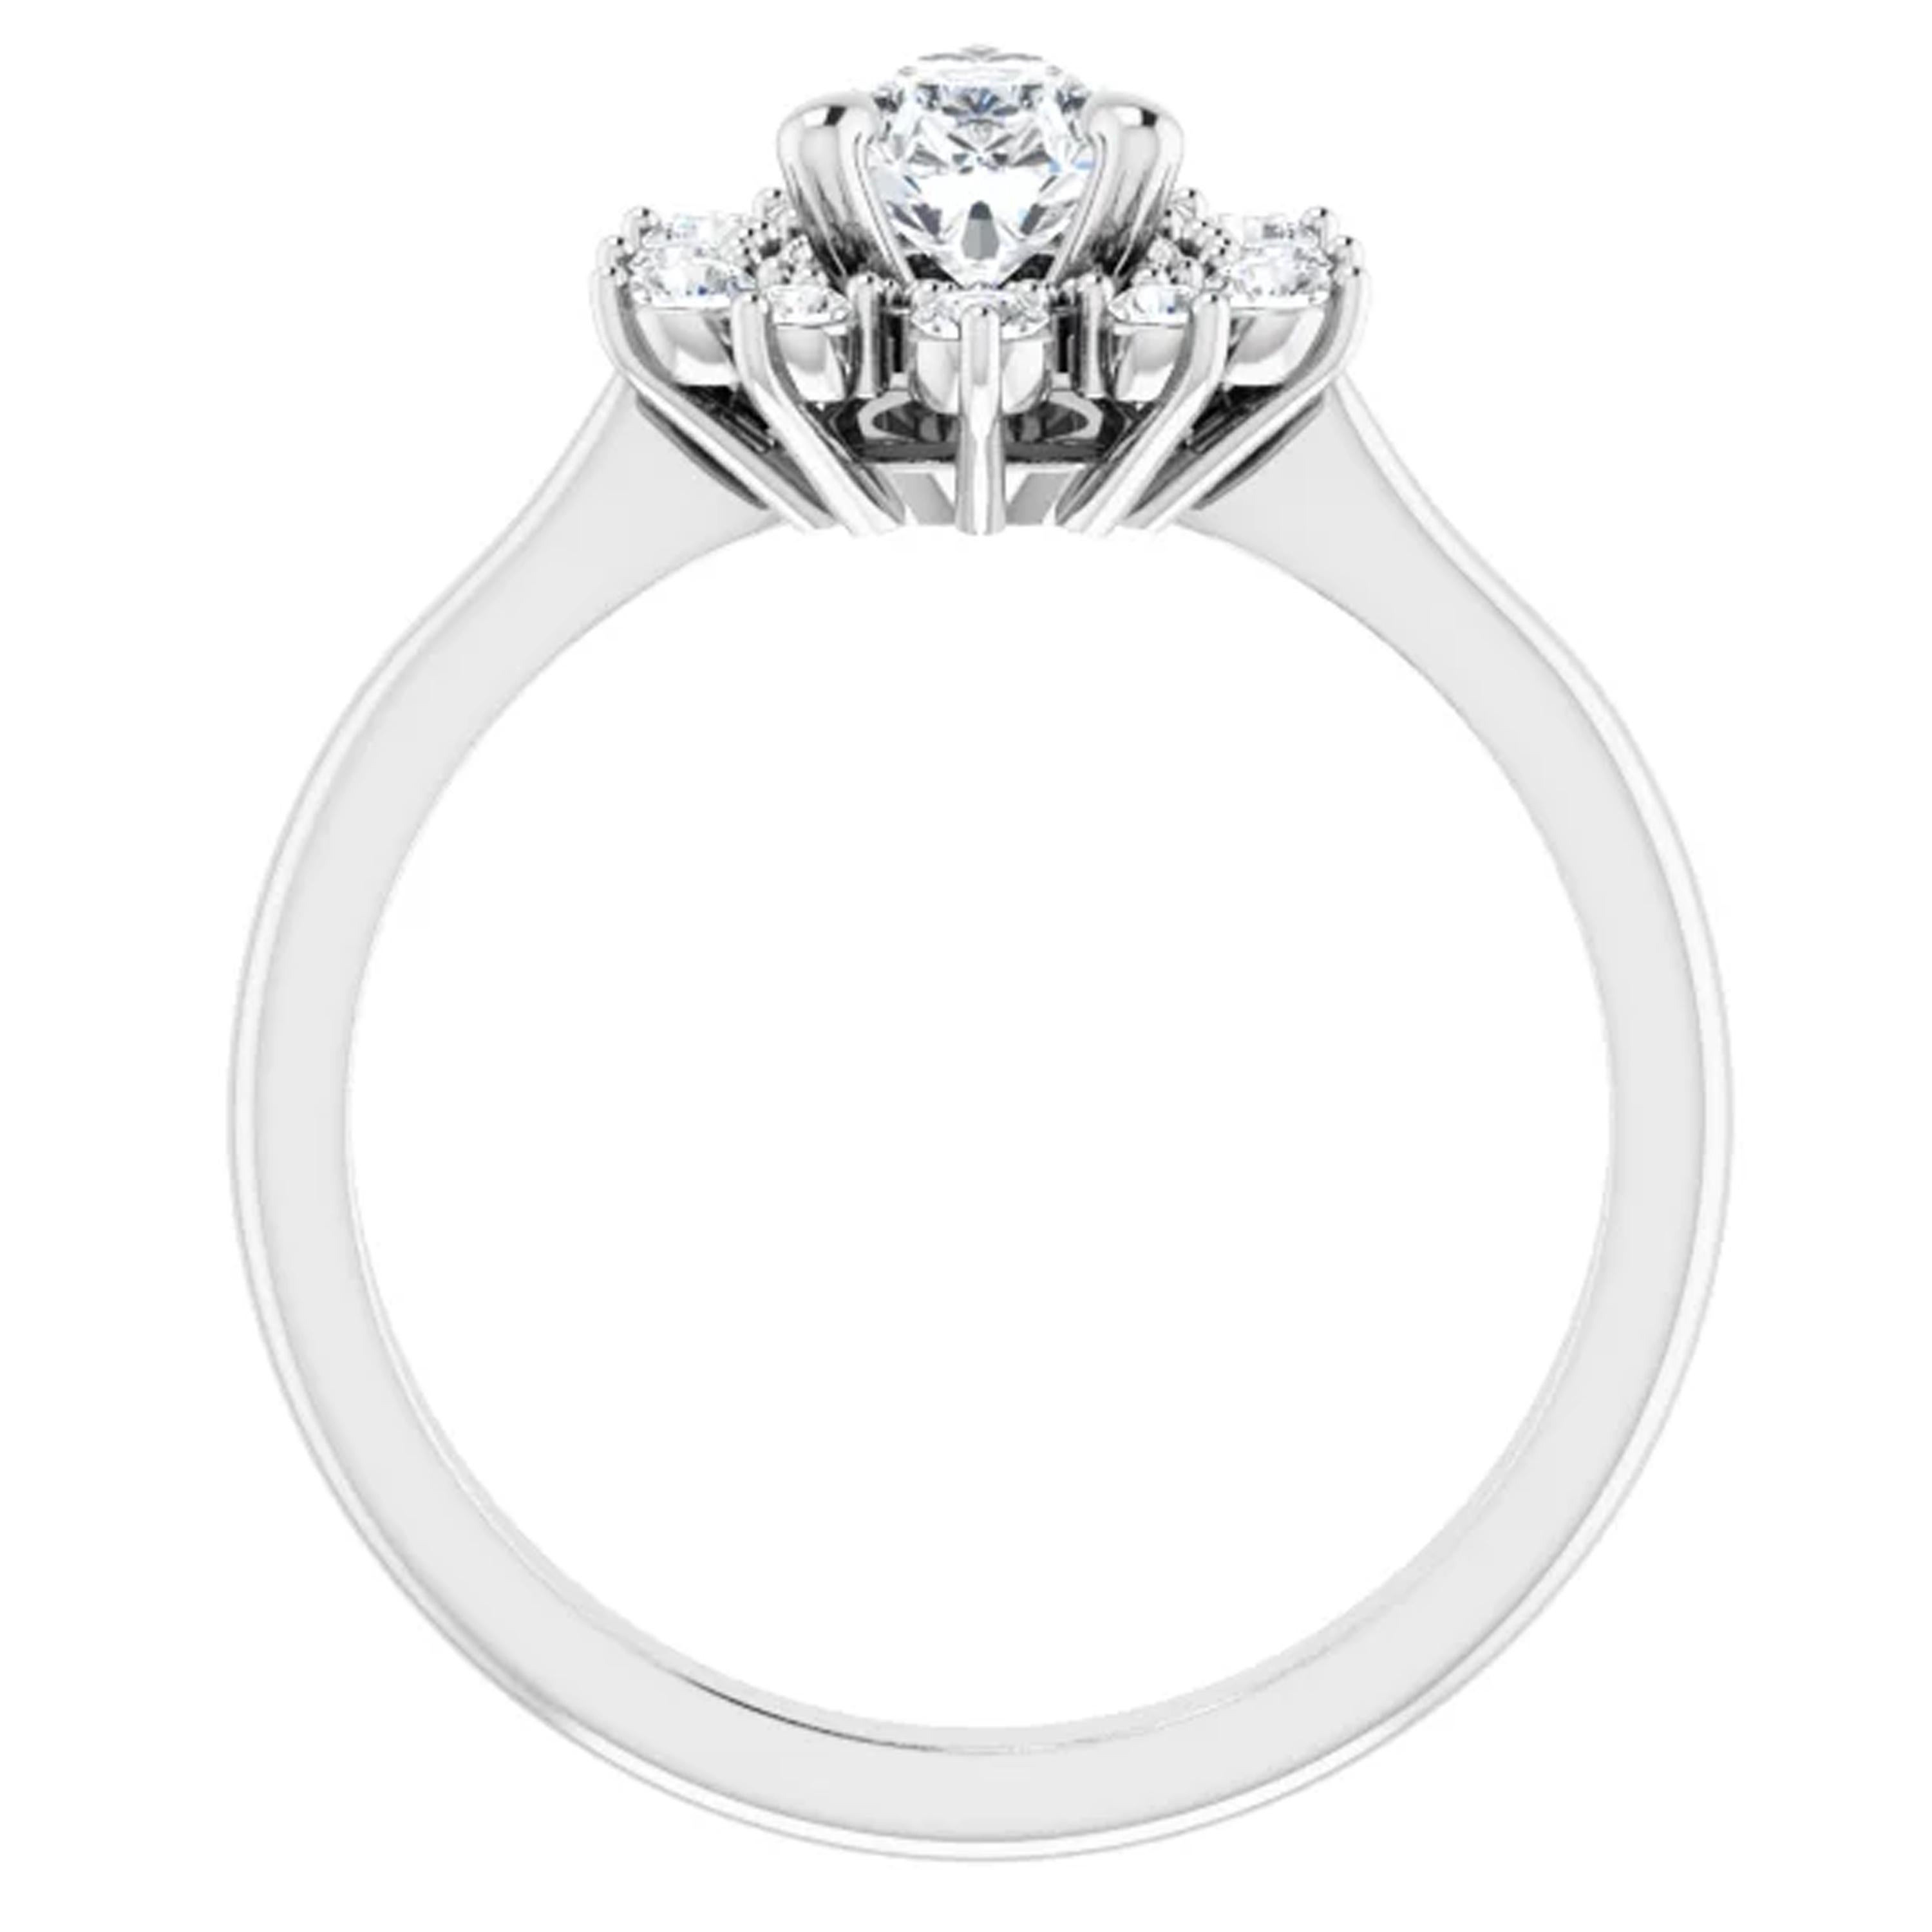 Lustrous white diamonds amplify the GIA certified center  diamond and make it appear bigger as they surround the halo of this engagement ring. Intricate milgrain detailing creates heirloom appeal.

Matching band sold separately.

Center Stone:
1